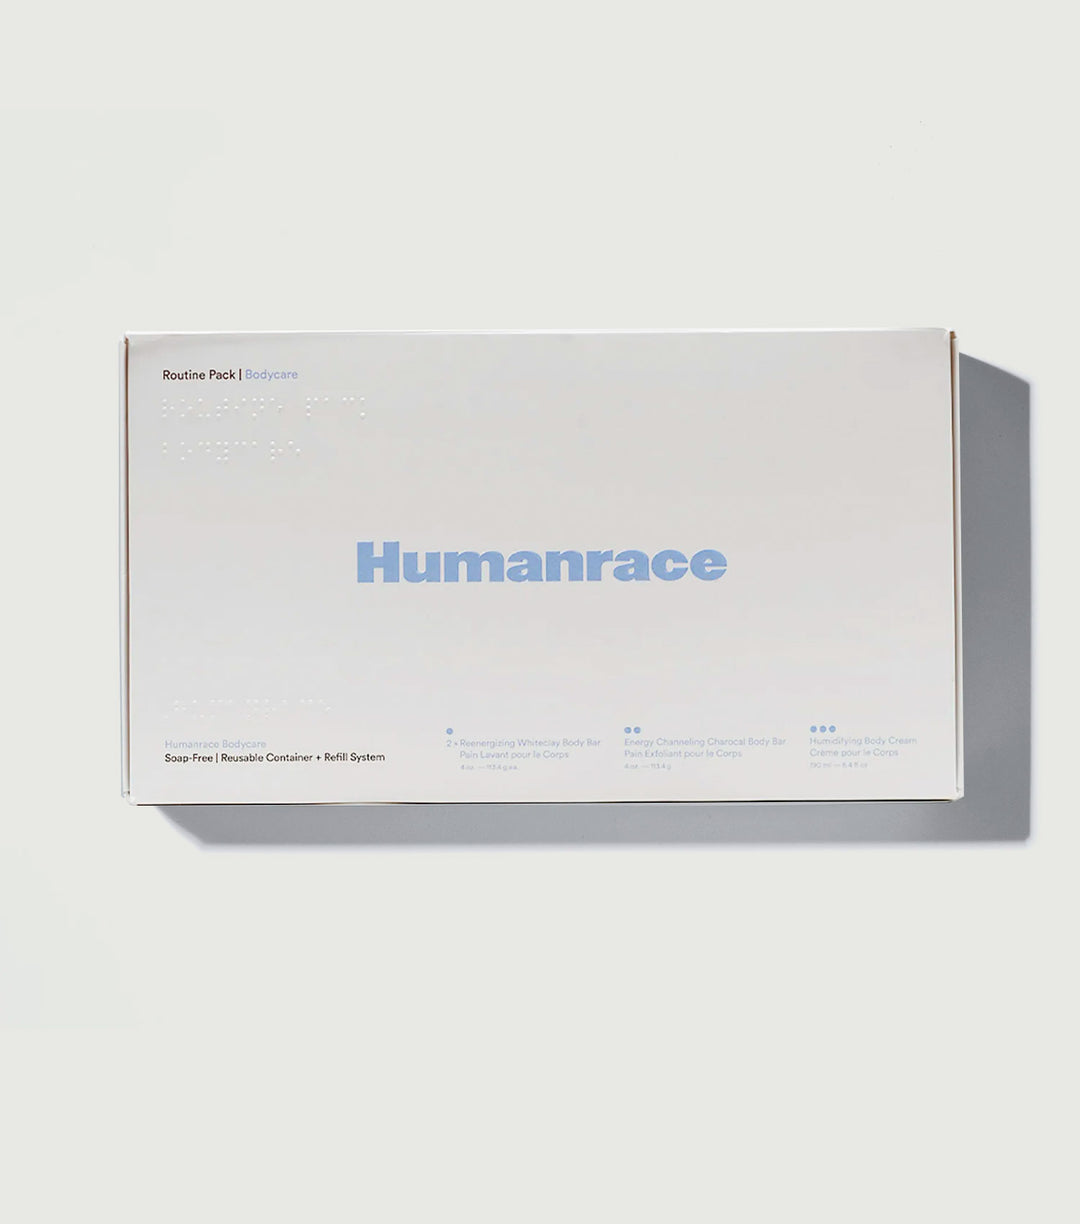 Bodycare Routine Pack - Humanrace